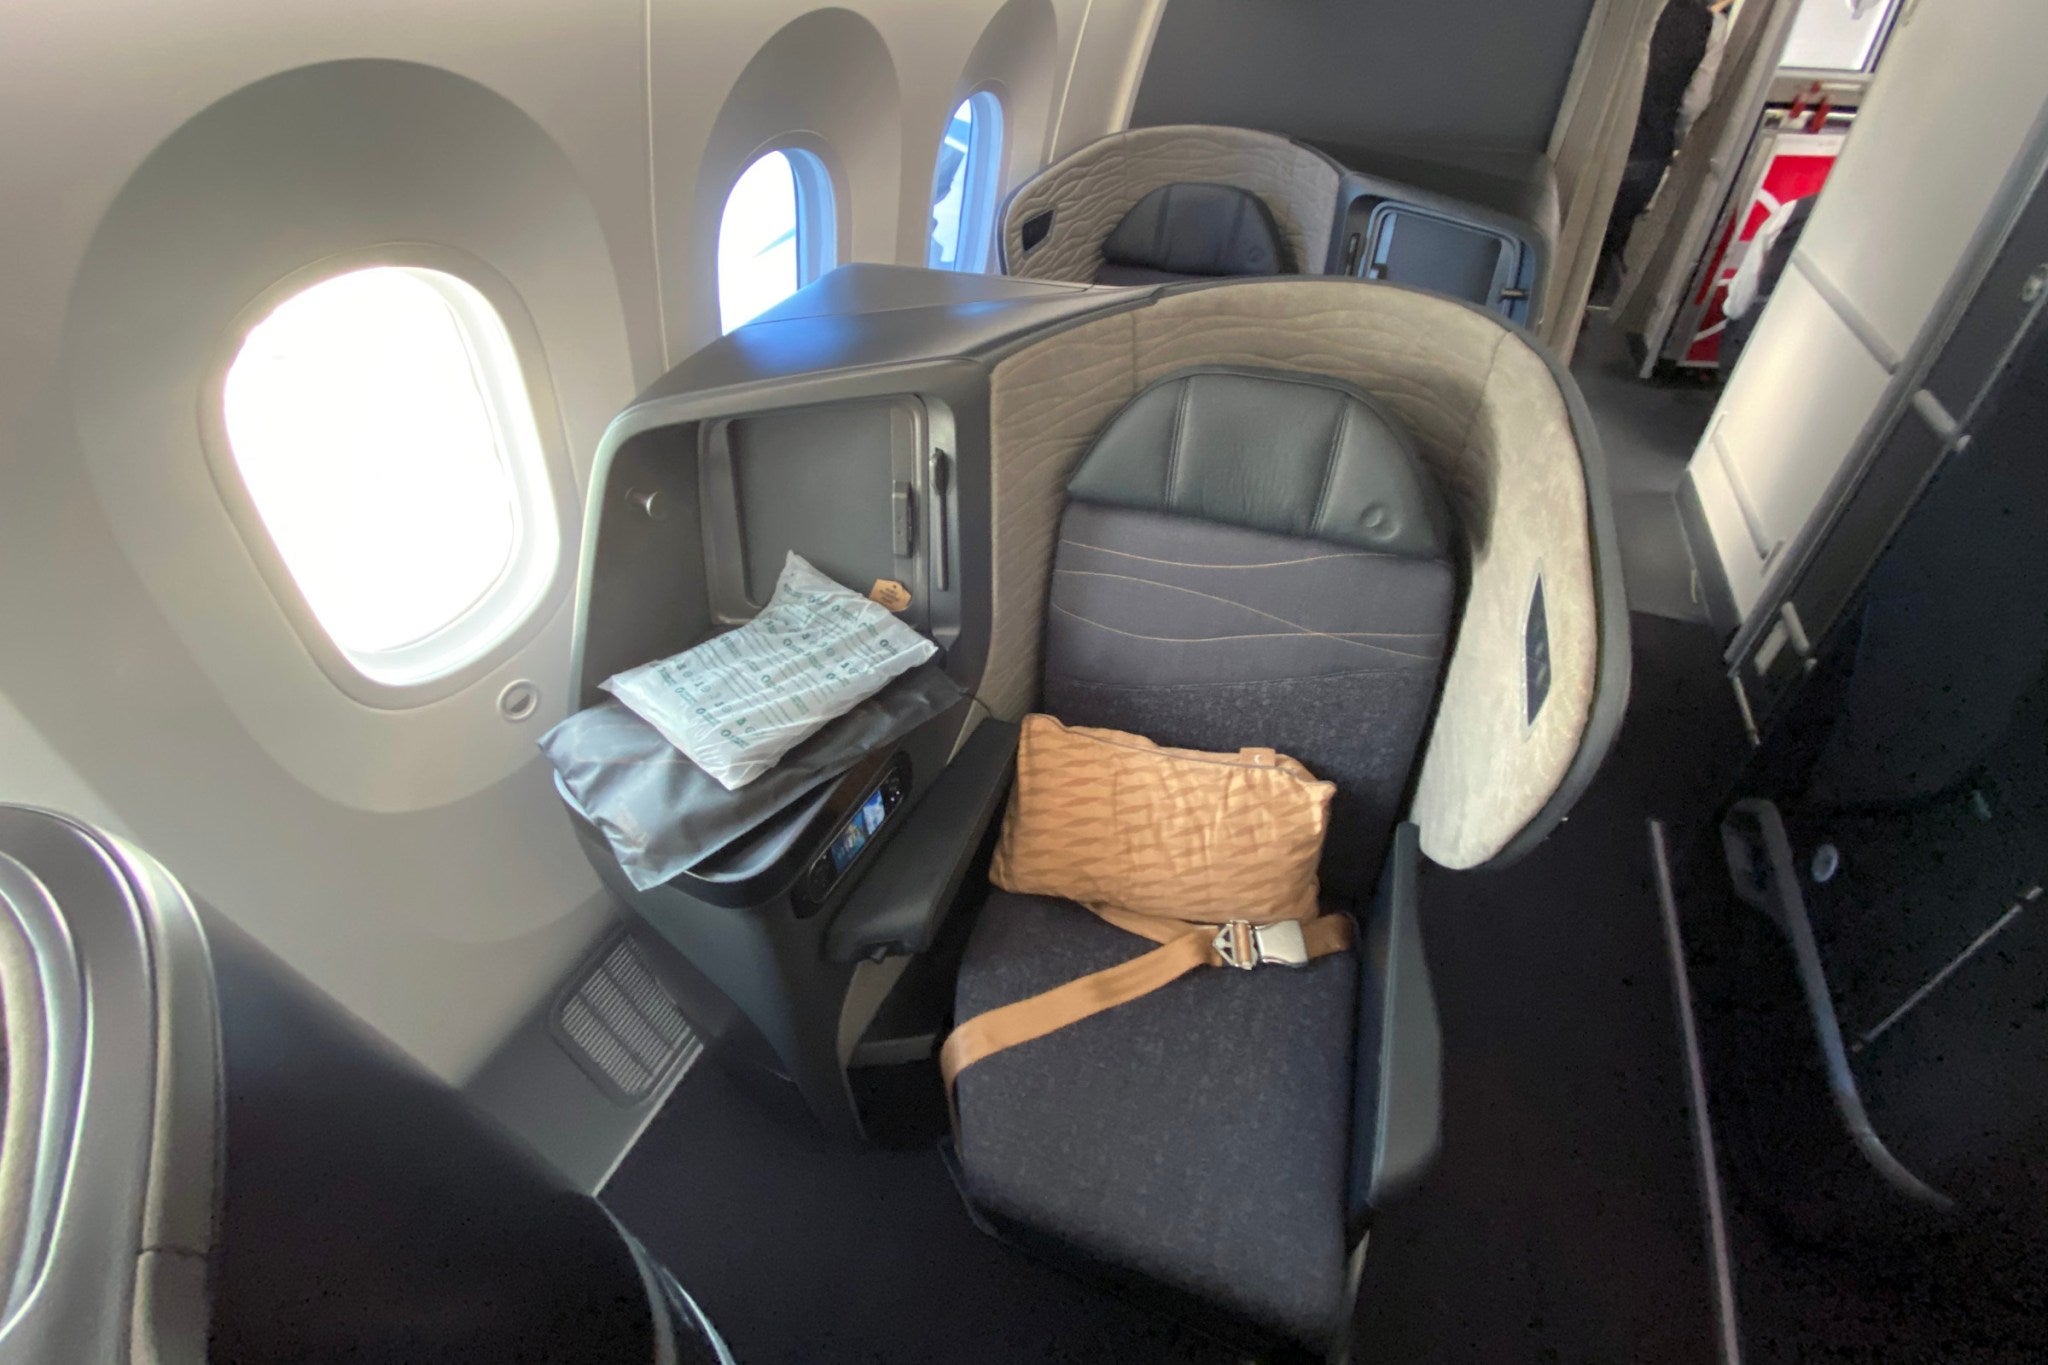 Turkish Airlines business class on the Boeing 787-9 Dreamliner